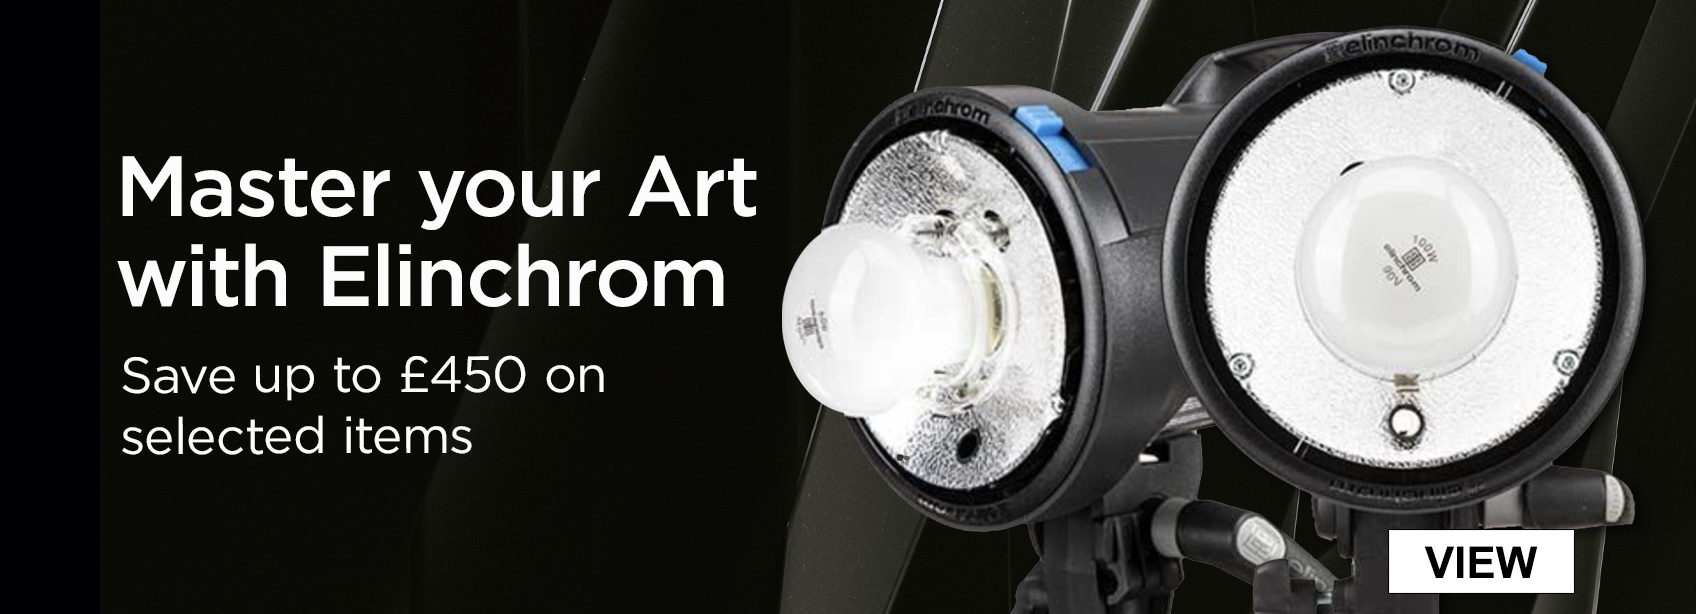 Master your Art with Elinchrom. Save up to £450 on selected items